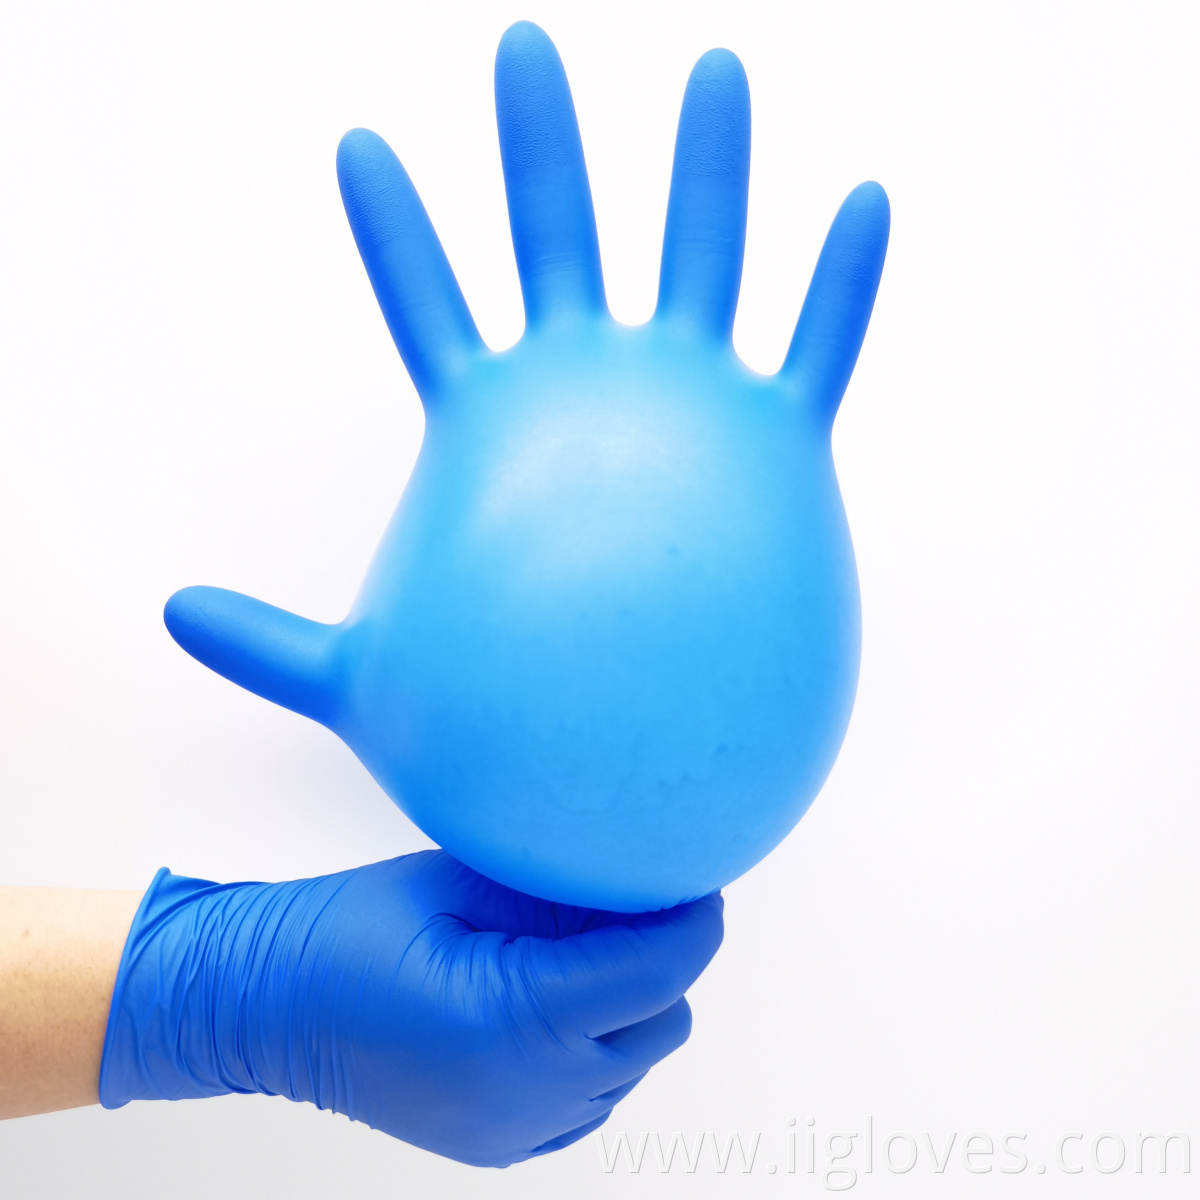 Customised experiment high quality blue glovent nitrile gloves individually packaged glove powder free blue for work